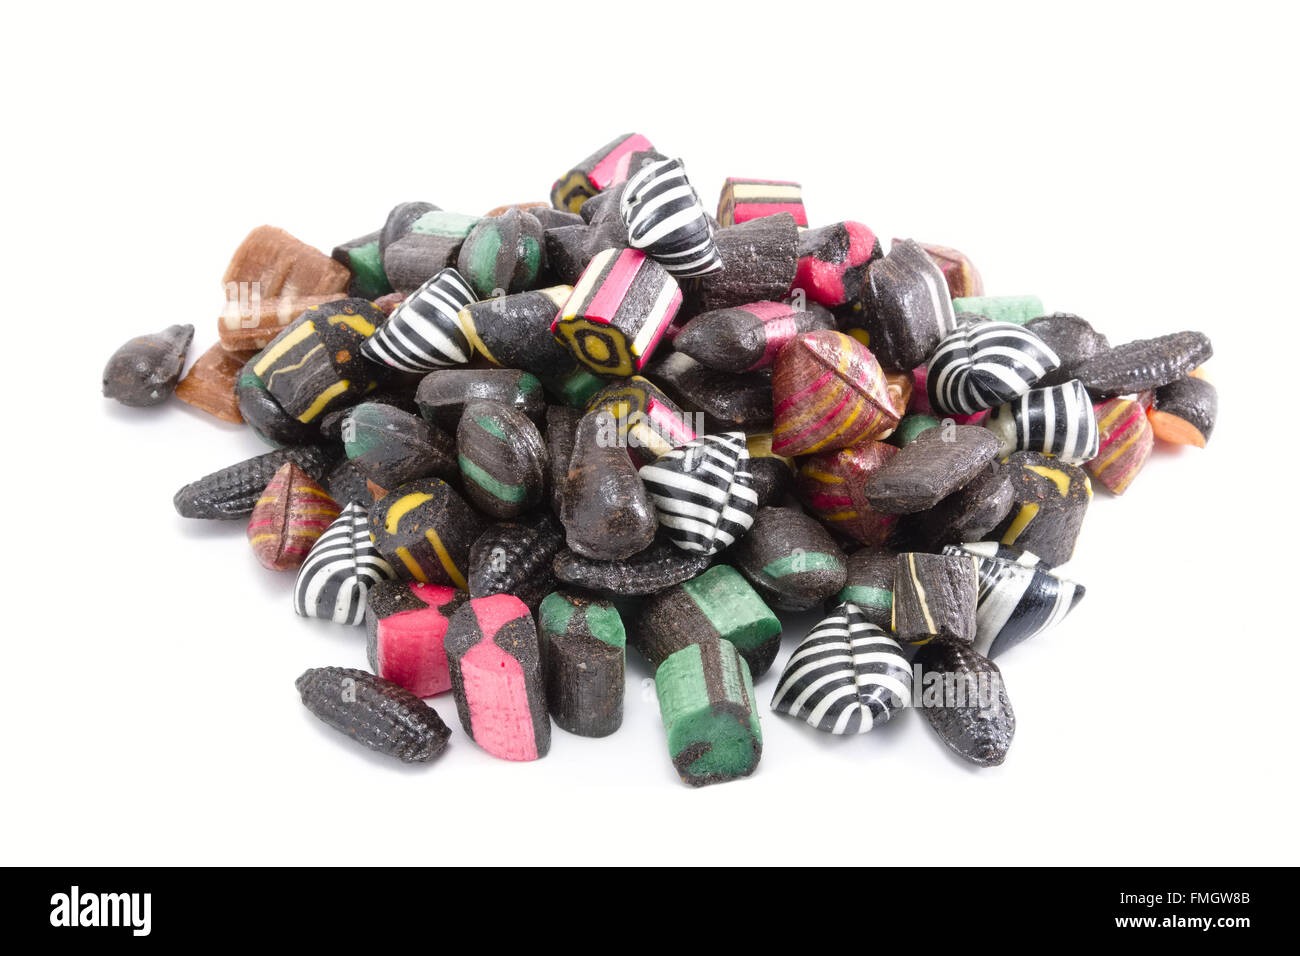 Pile of black and colored liquorice rock candy pieces Stock Photo